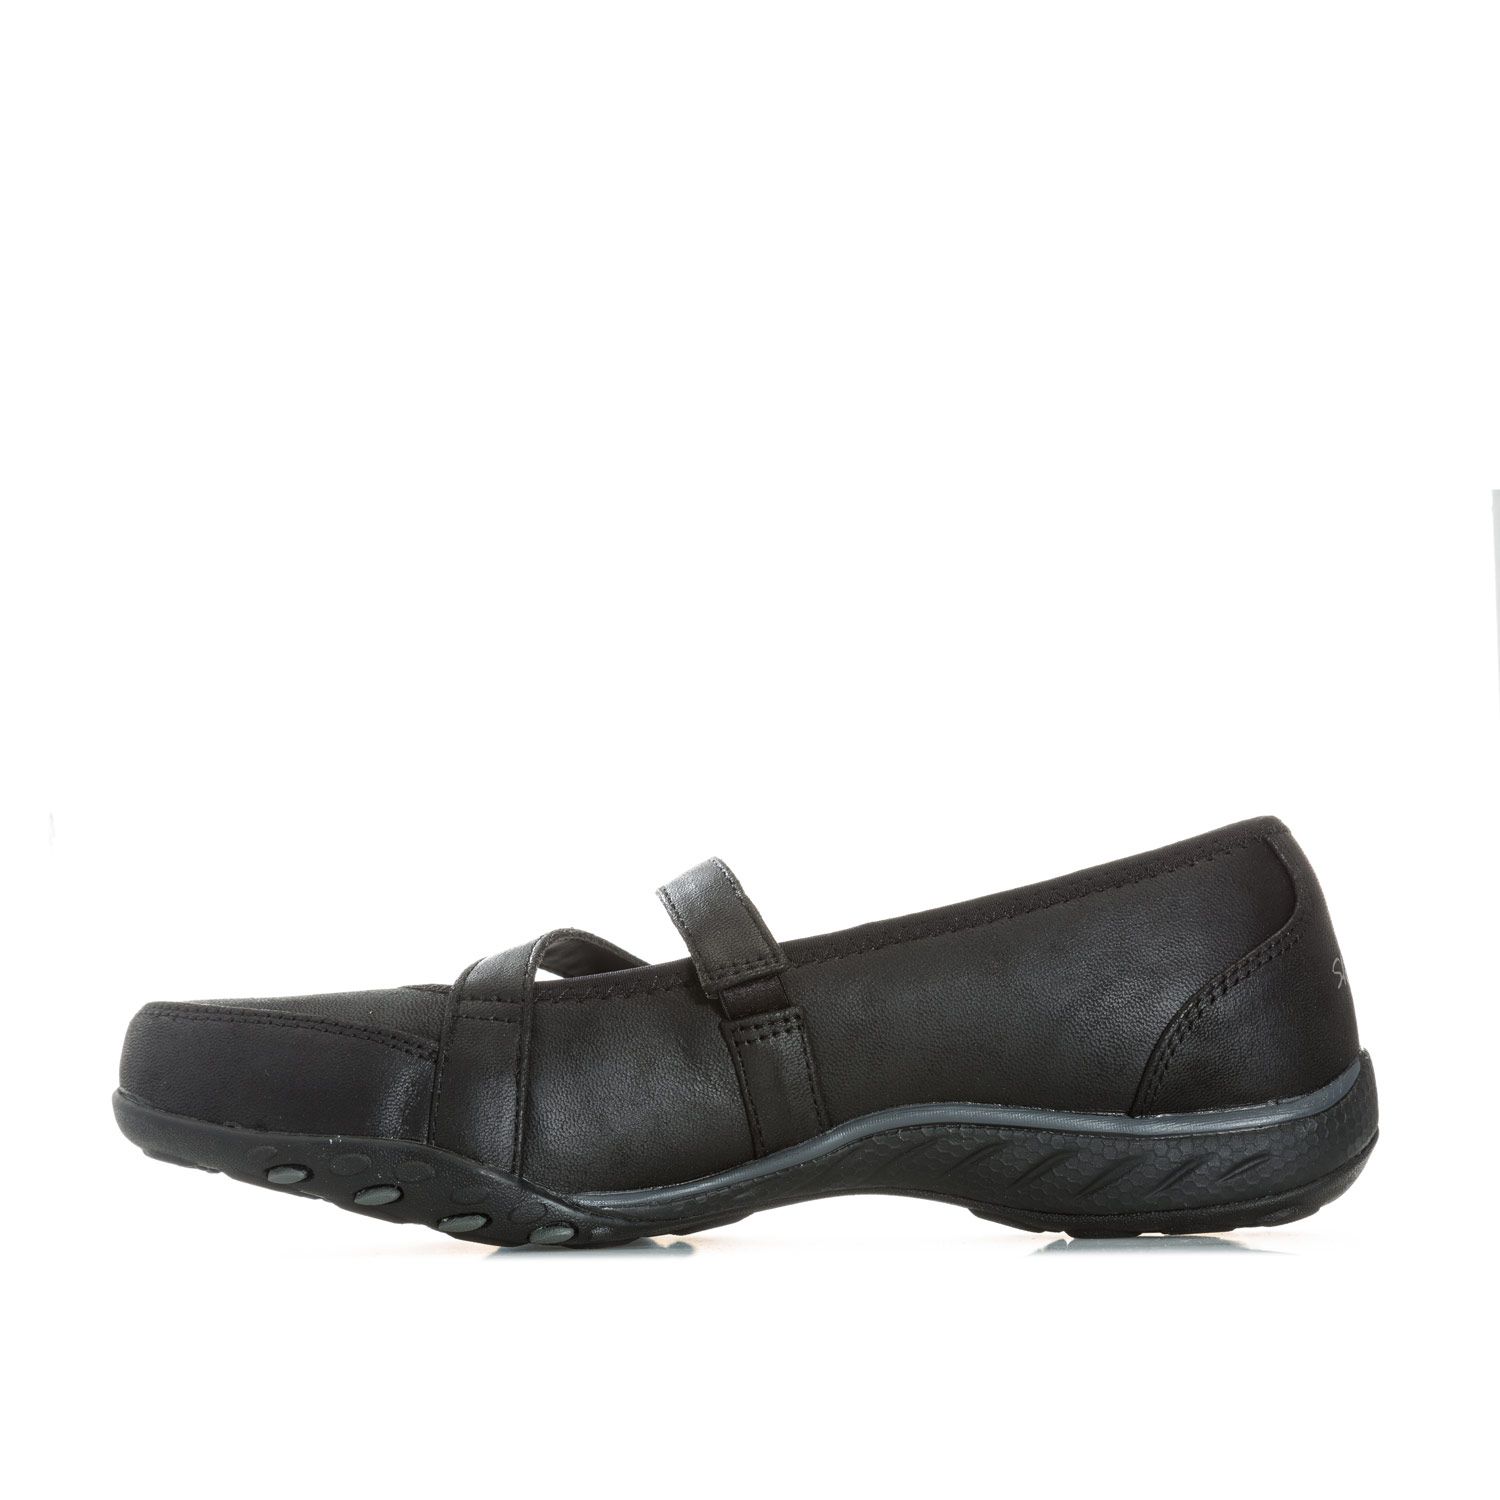 Black Skechers Womens Relaxed Fit Breathe Shoes Get The Label